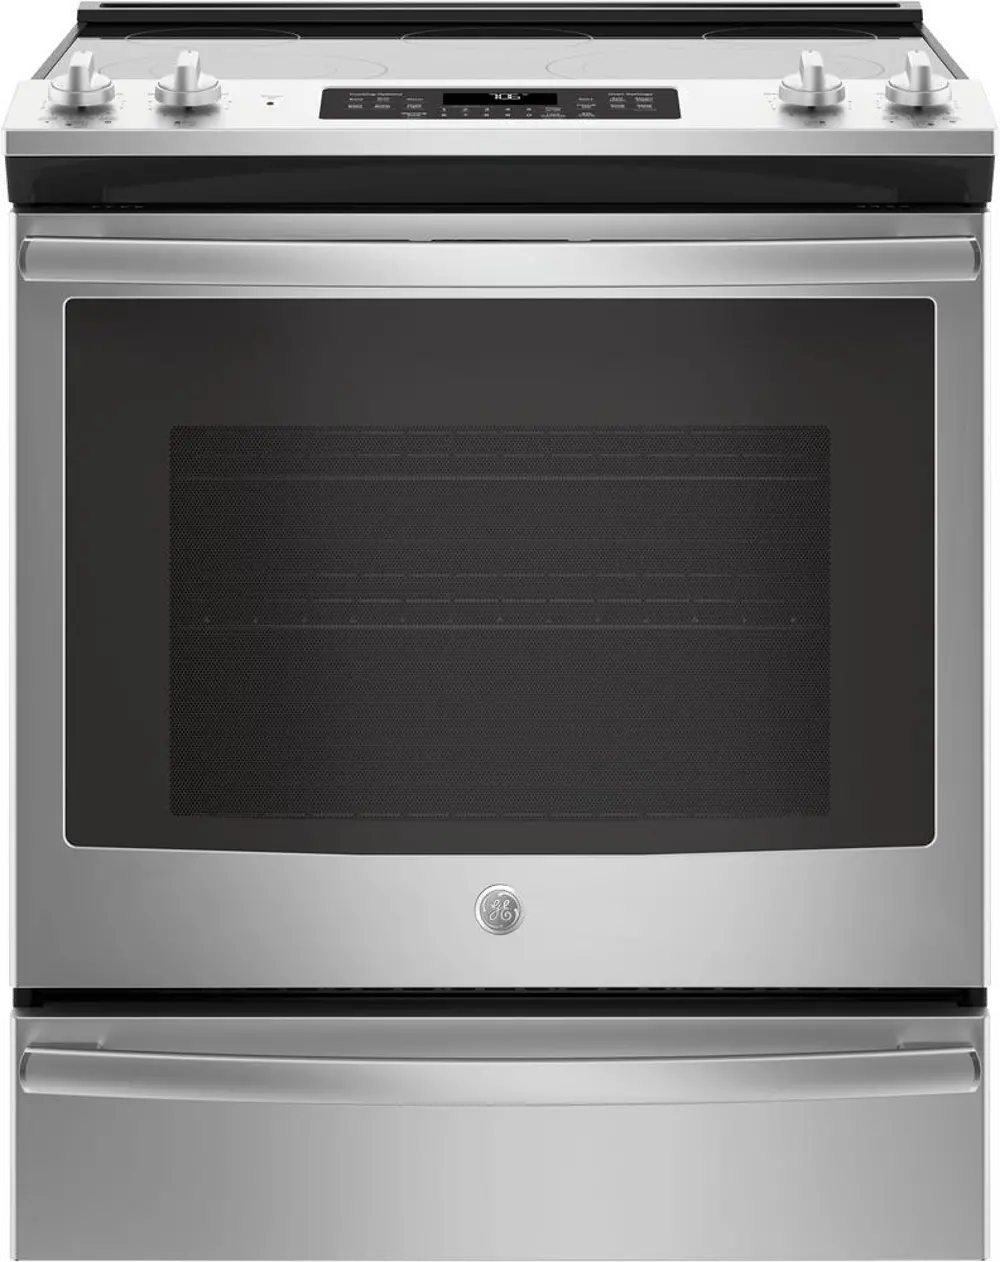 JS760SLSS GE 5.3 cu. ft. Electric Range with True European Convection - Stainless Steel-1